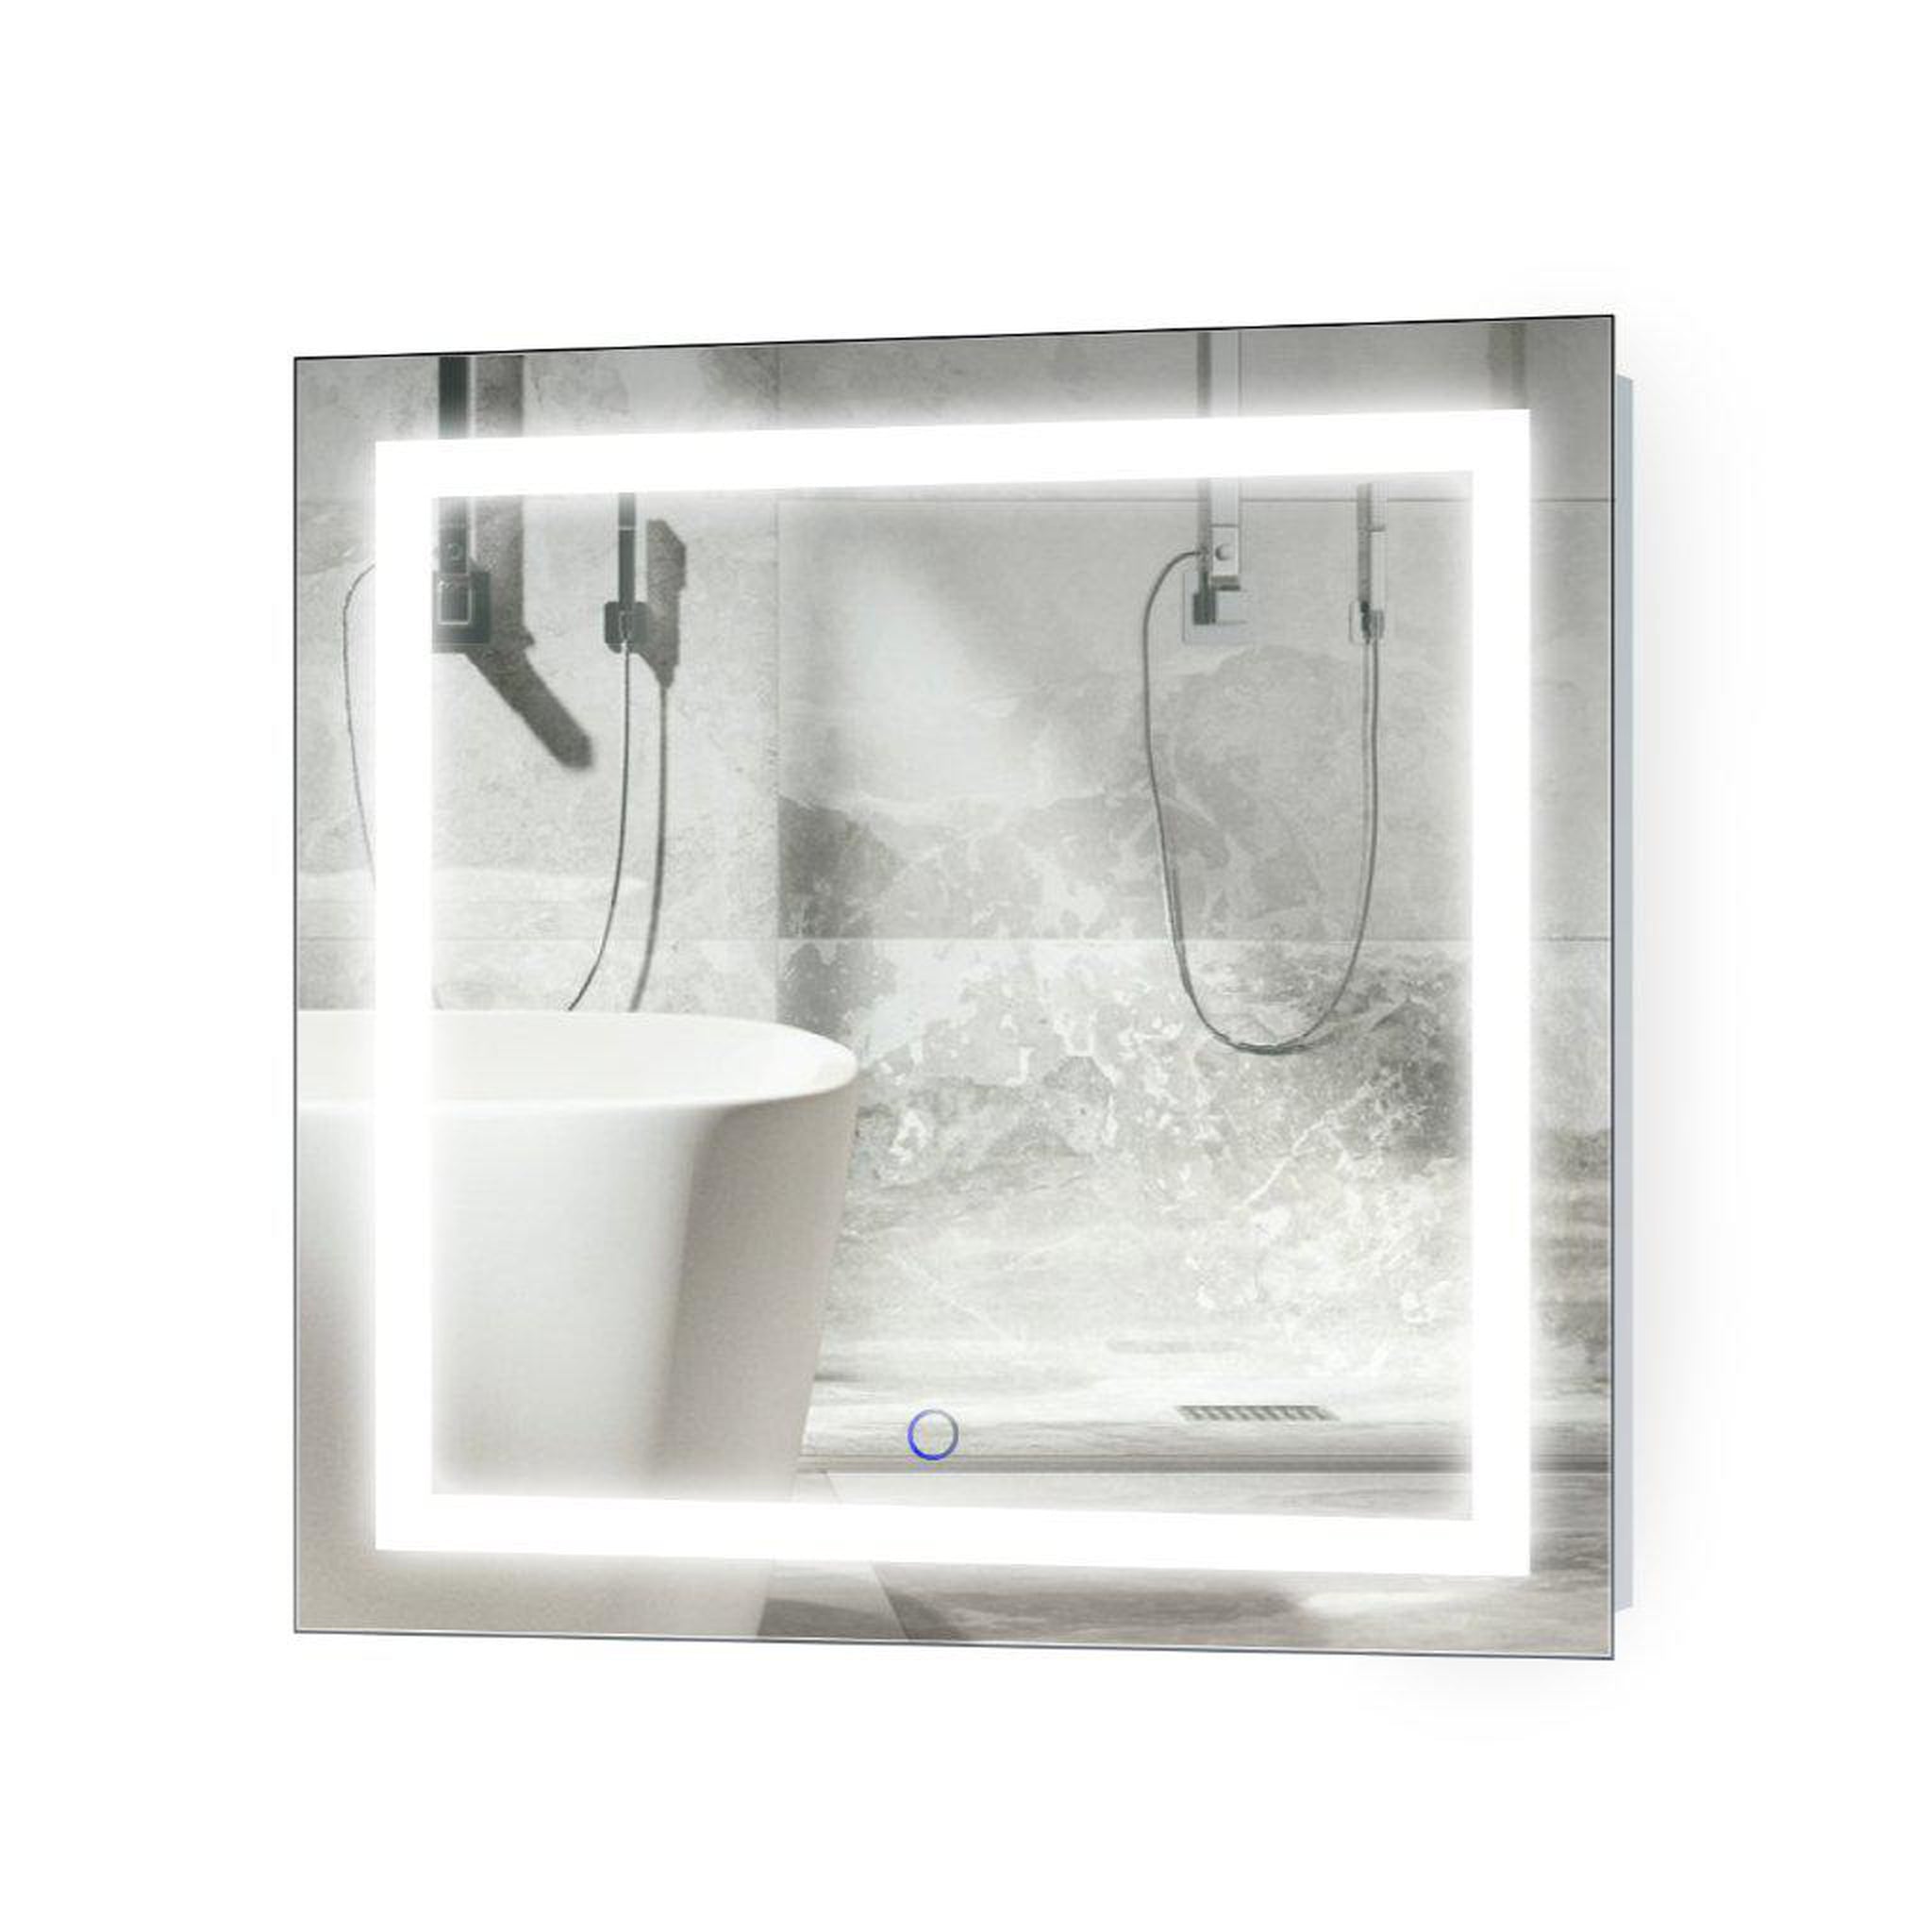 Krugg Reflections, Krugg Reflections Icon 24" x 24" 5000K Square Wall-Mounted Illuminated Silver Backed LED Mirror With Built-in Defogger and Touch Sensor On/Off Built-in Dimmer